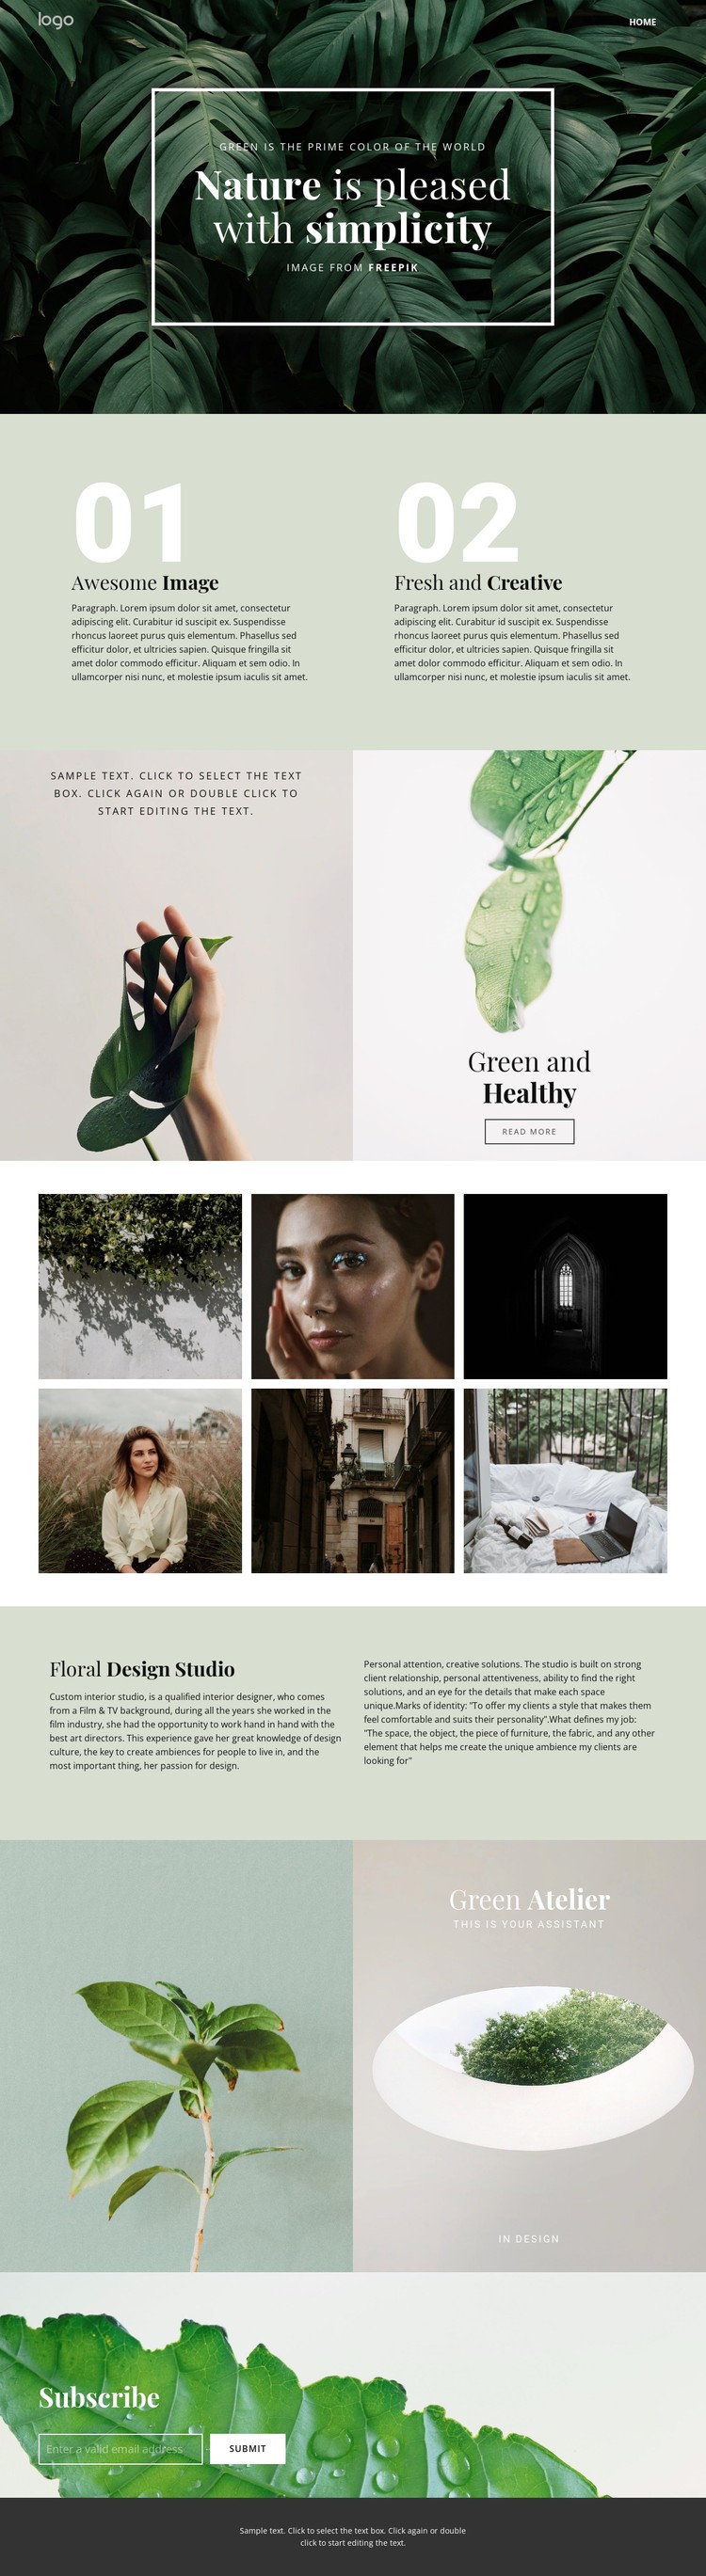 Beauty simplicity of nature CSS Template